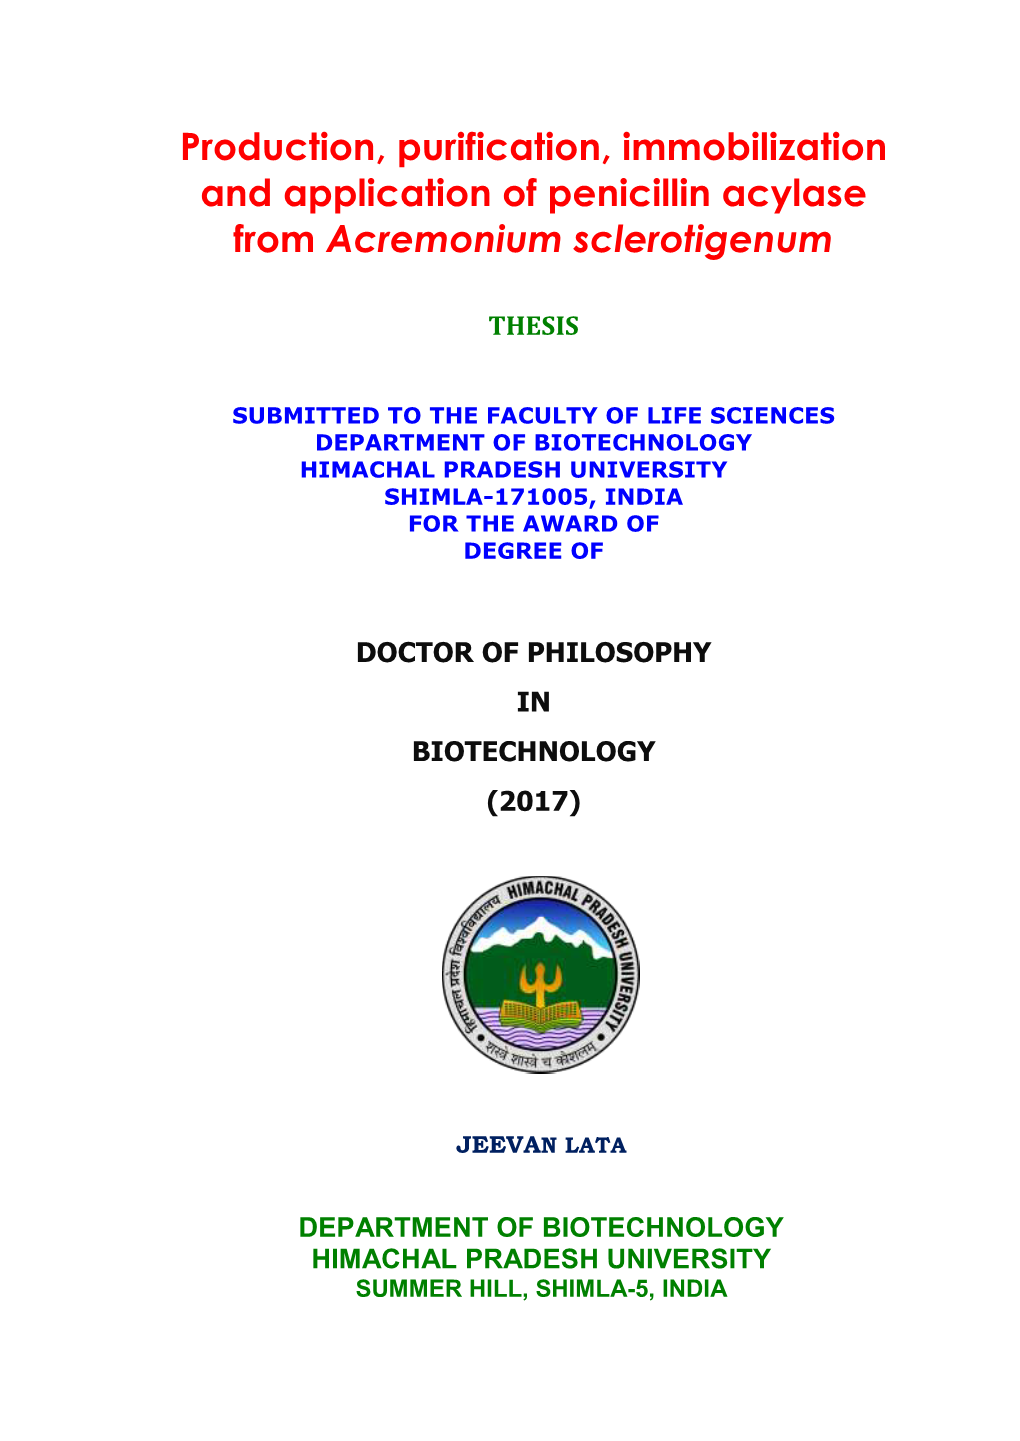 Production, Purification, Immobilization and Application of Penicillin Acylase from Acremonium Sclerotigenum